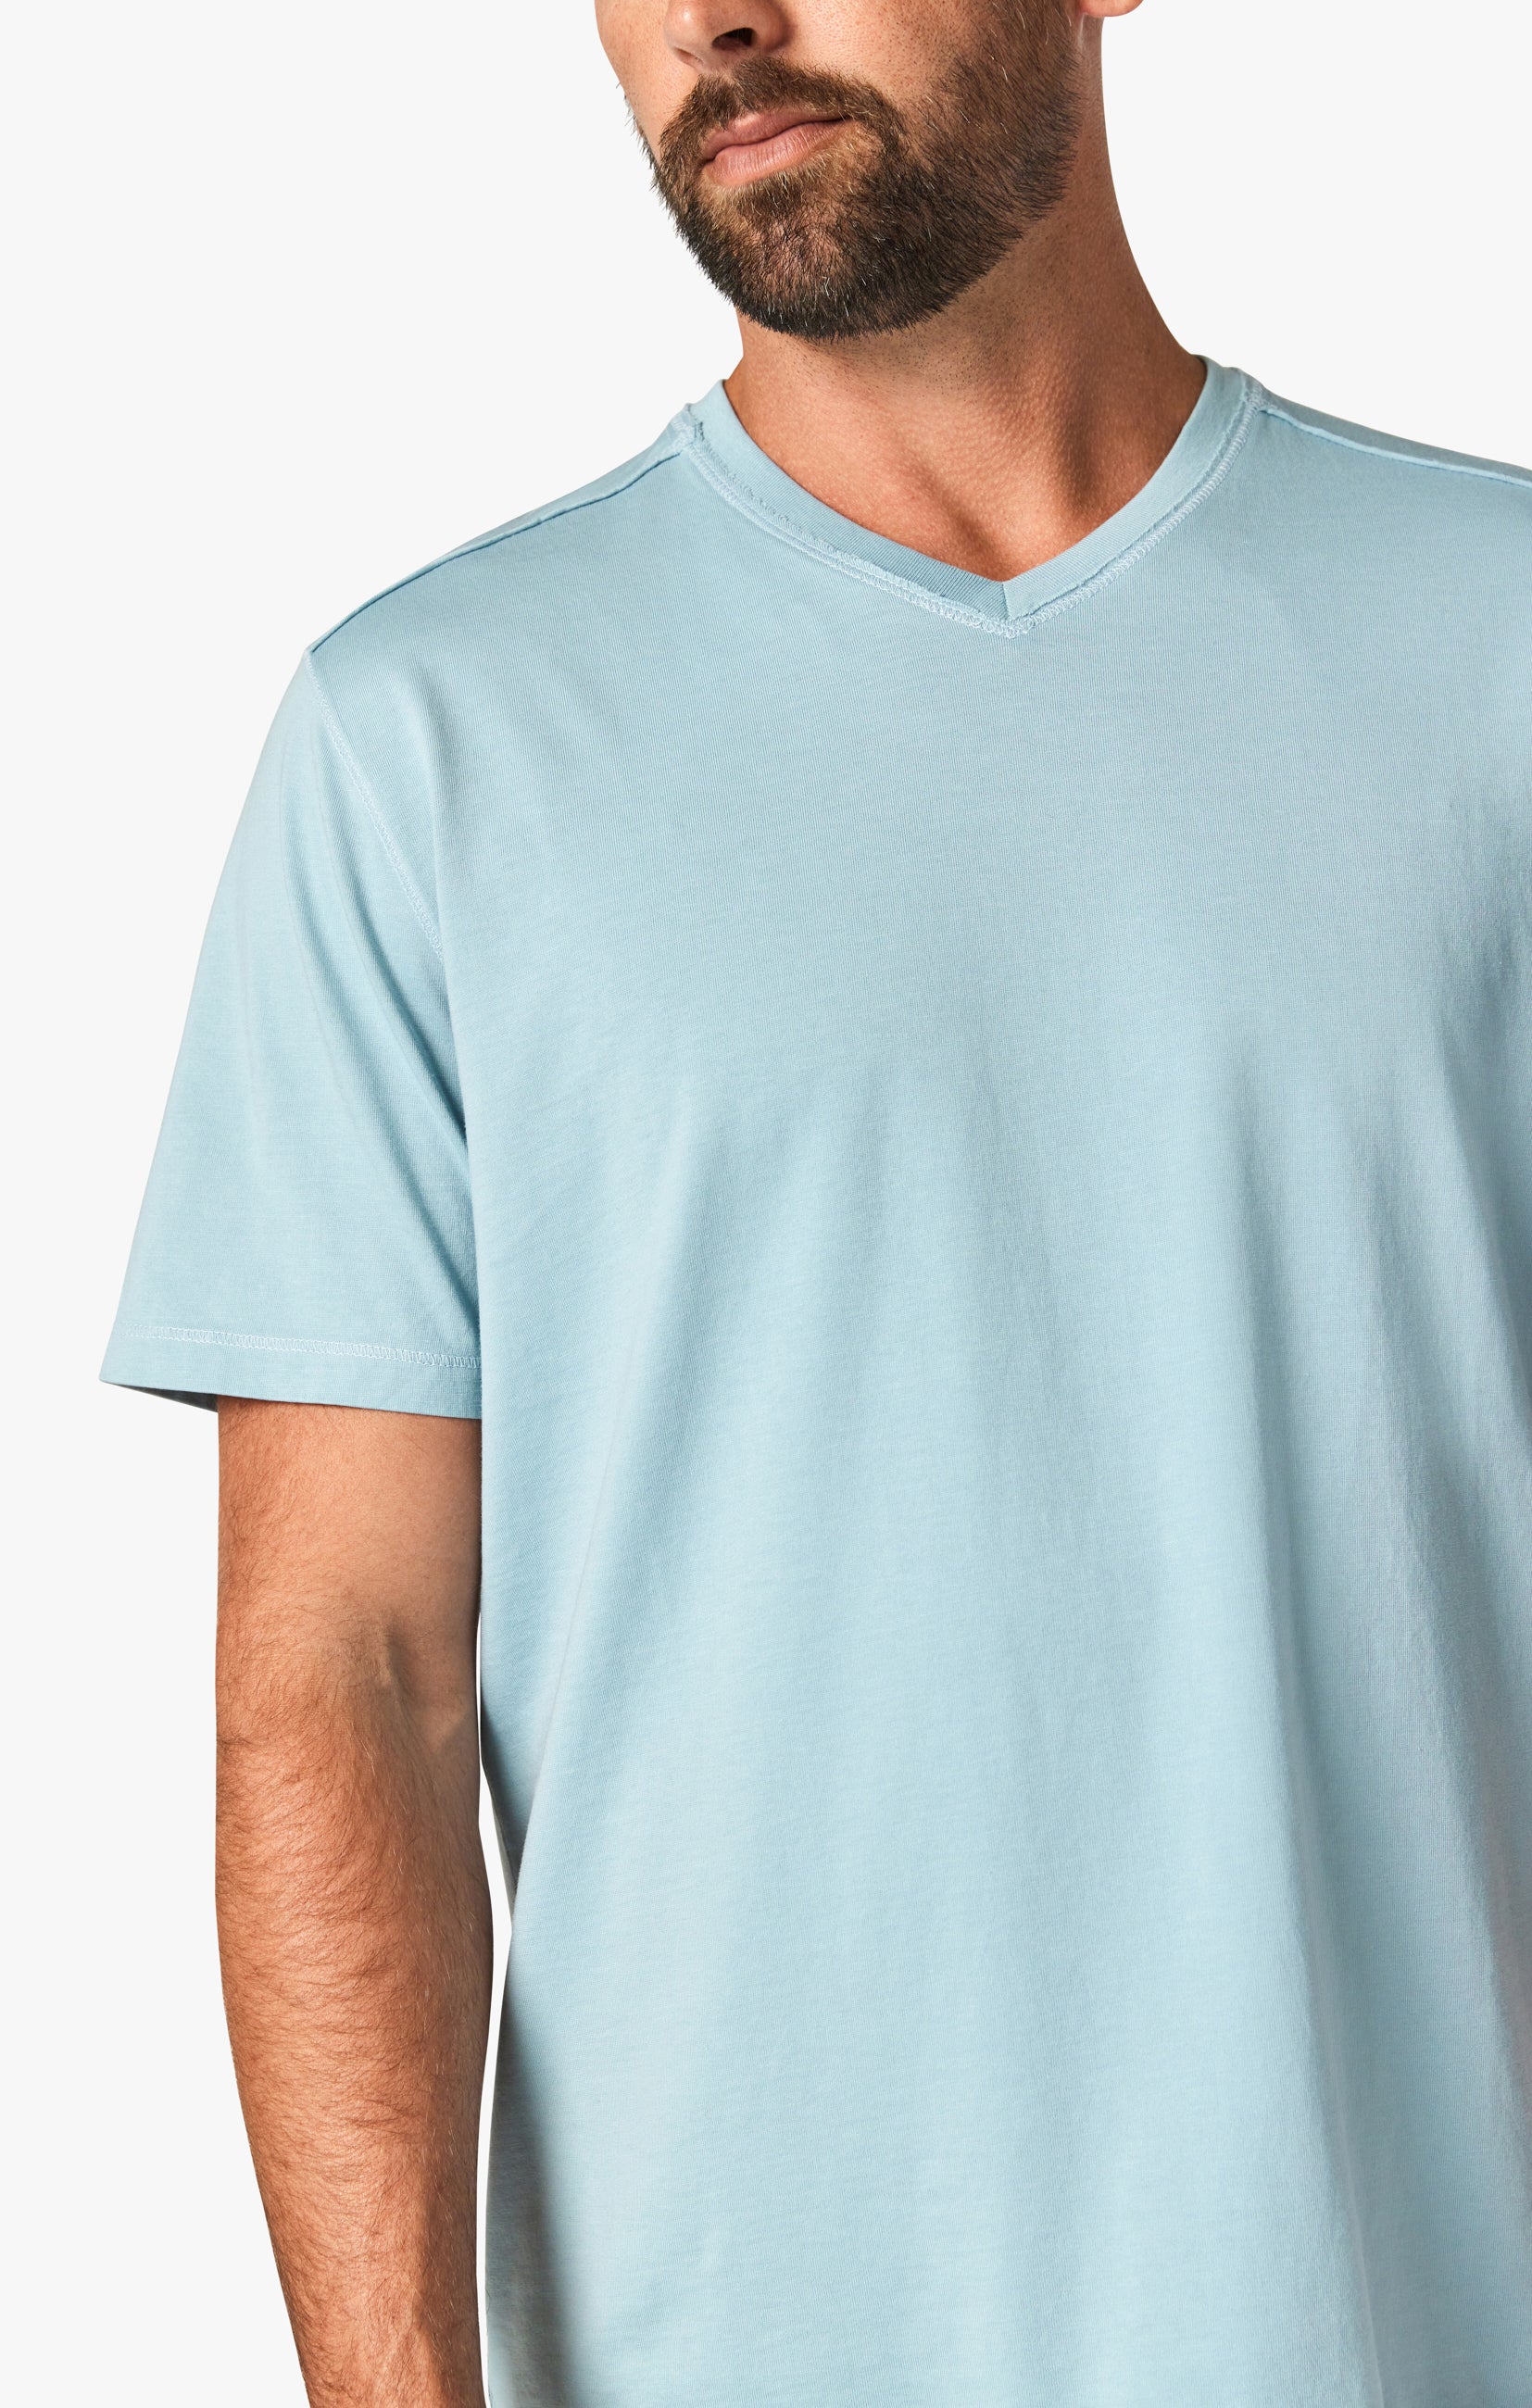 Deconstructed V-Neck T-Shirt in Forget-Me-Not Image 2